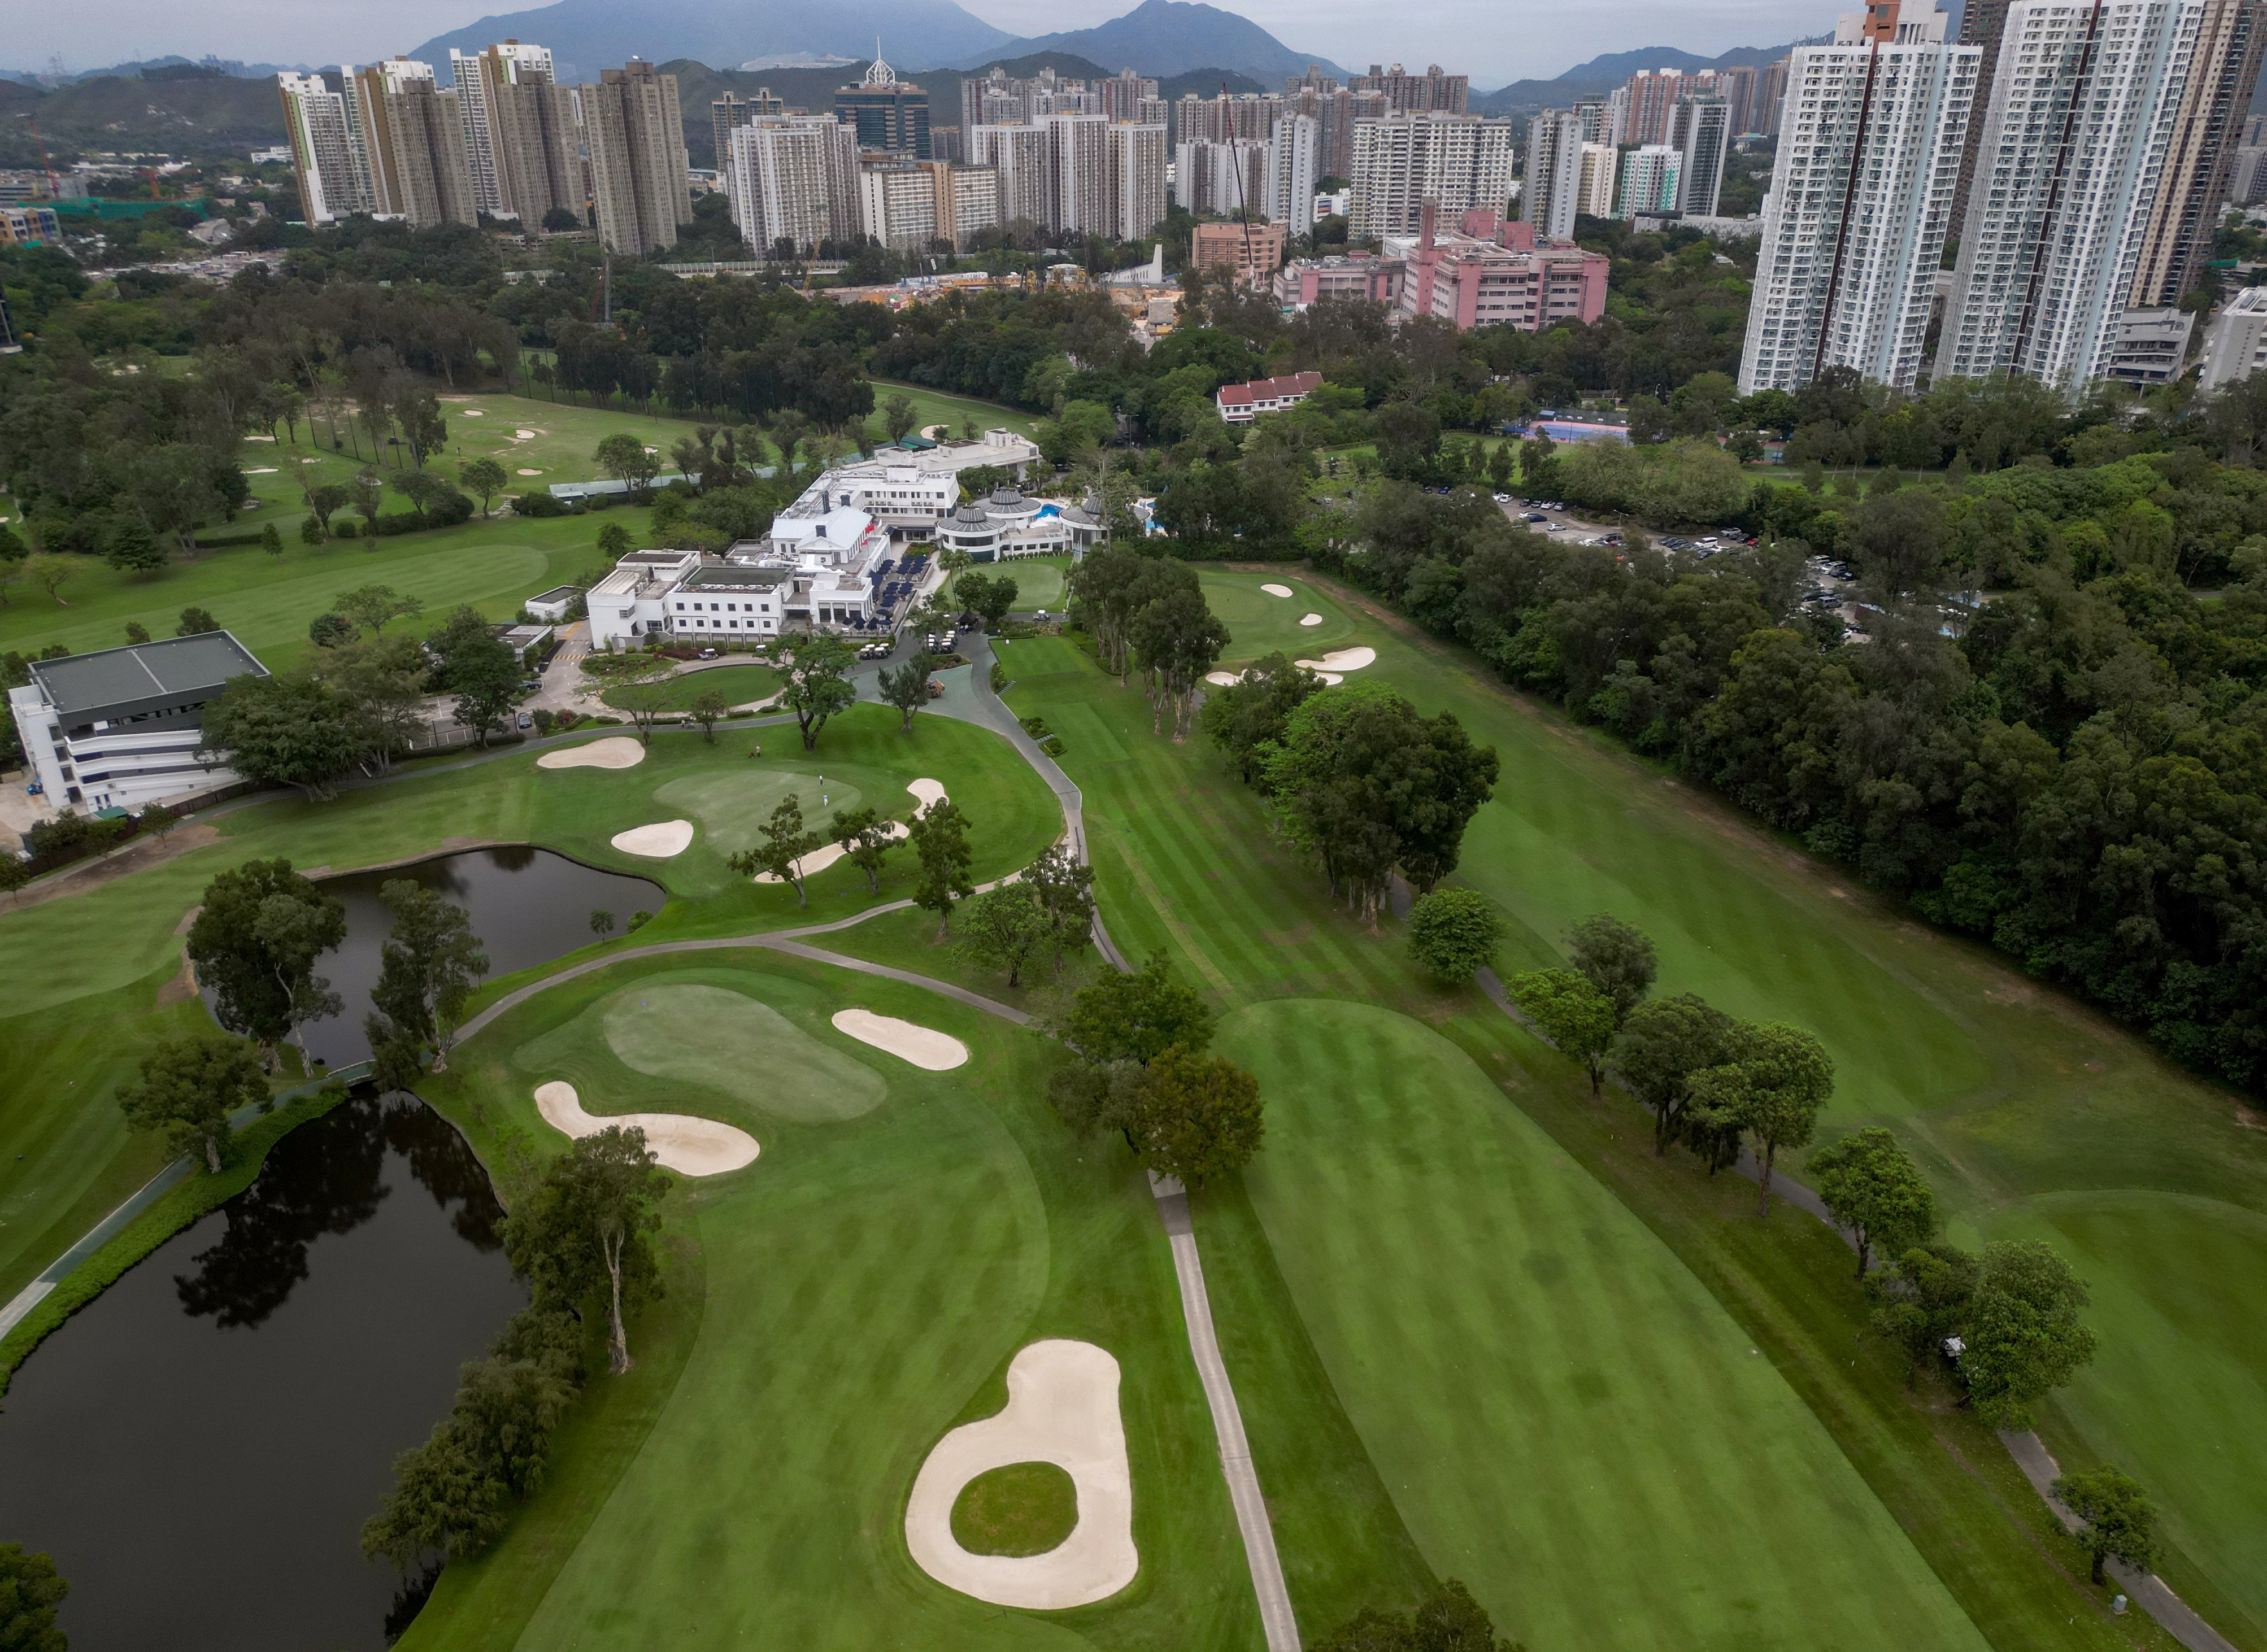 The government will take back 32 hectares of land leased by the Hong Kong Golf Club in Fanling. Photo: May Tse